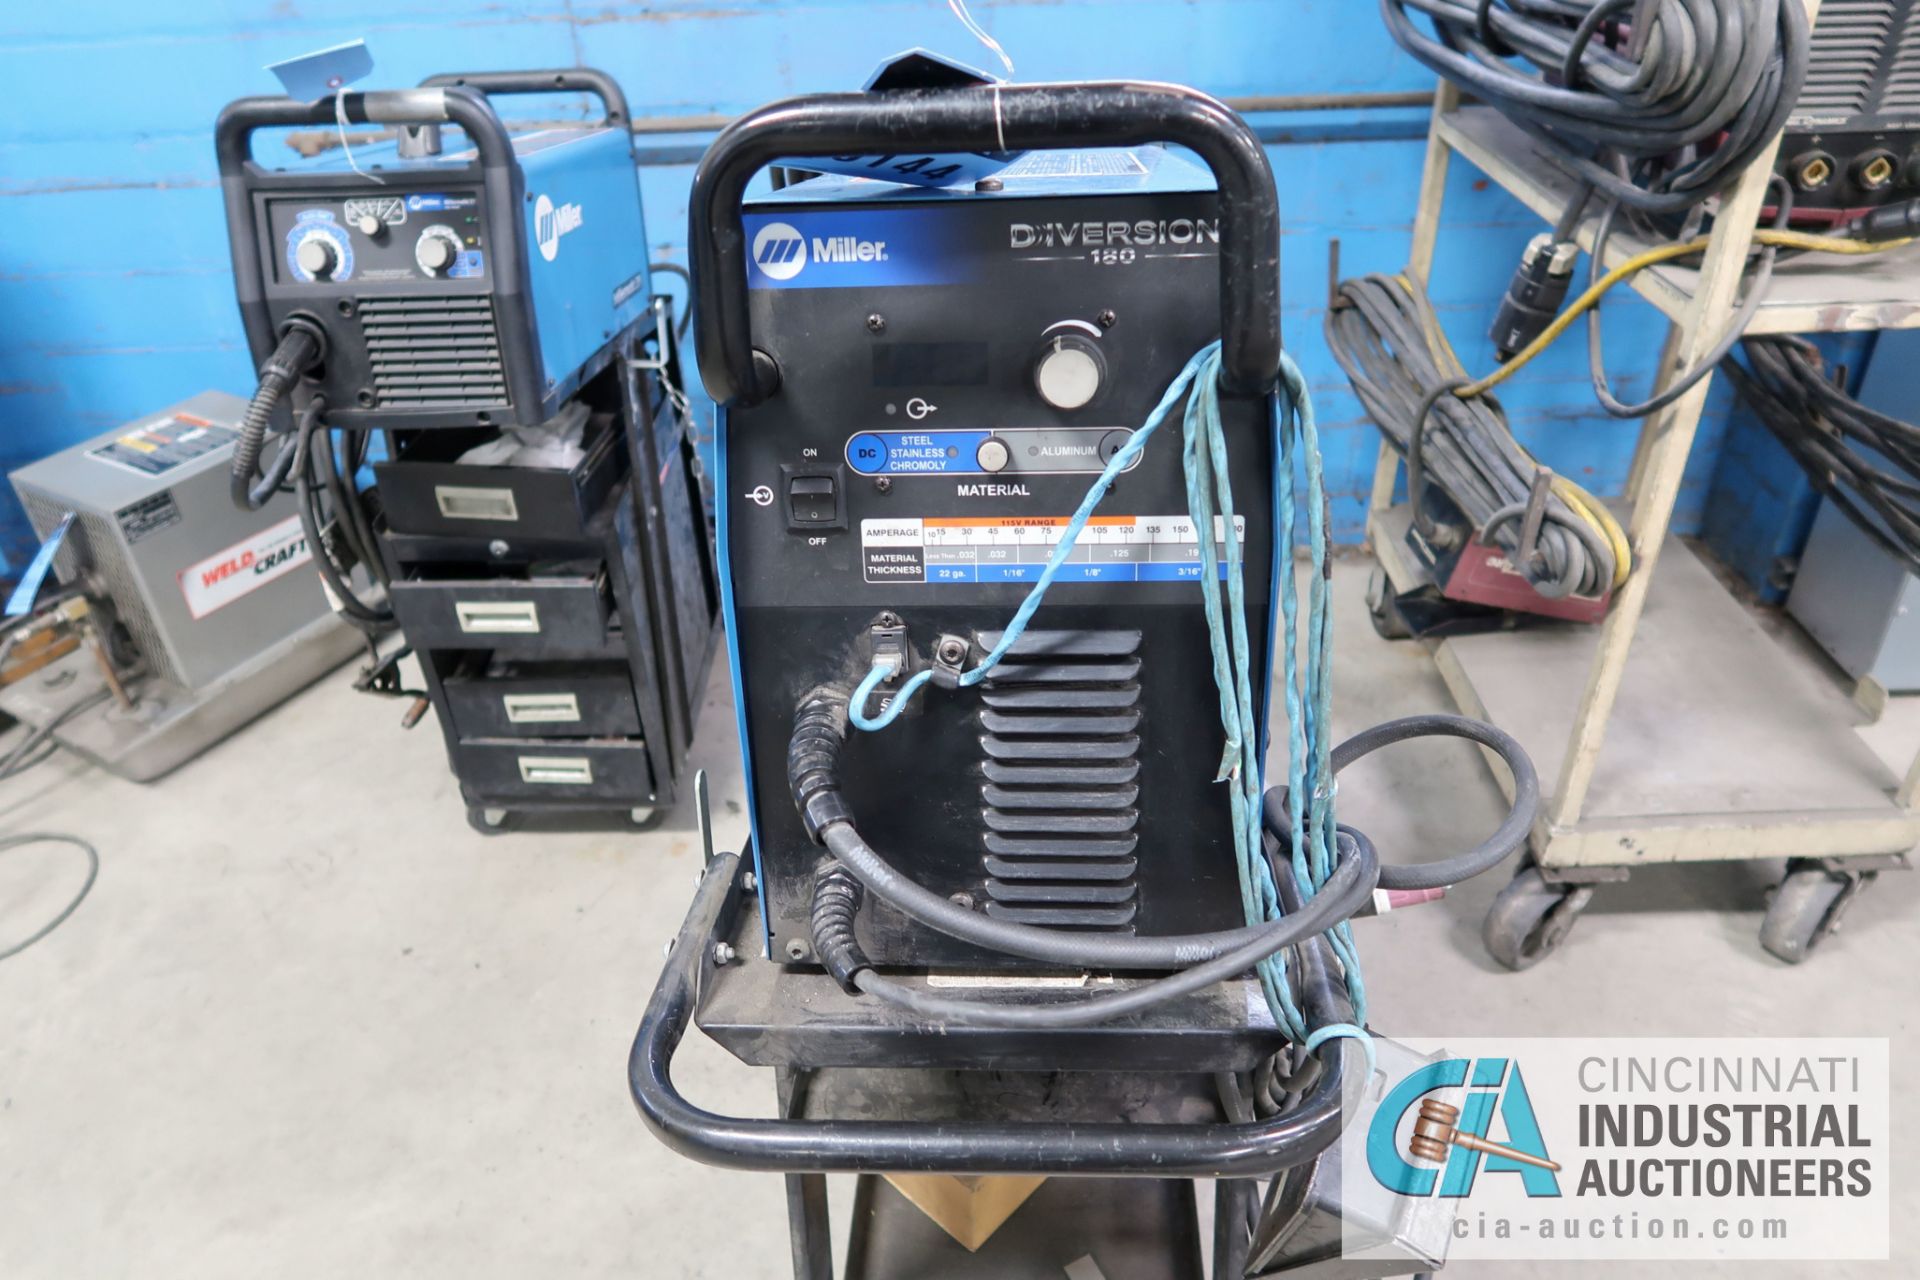 180 AMP MILLER DIVERSON 180 TIG WELDER POWER SOURCE; S/N MF360924L, WITH CART, LEADS, AND FOOT PEDAL - Image 2 of 4